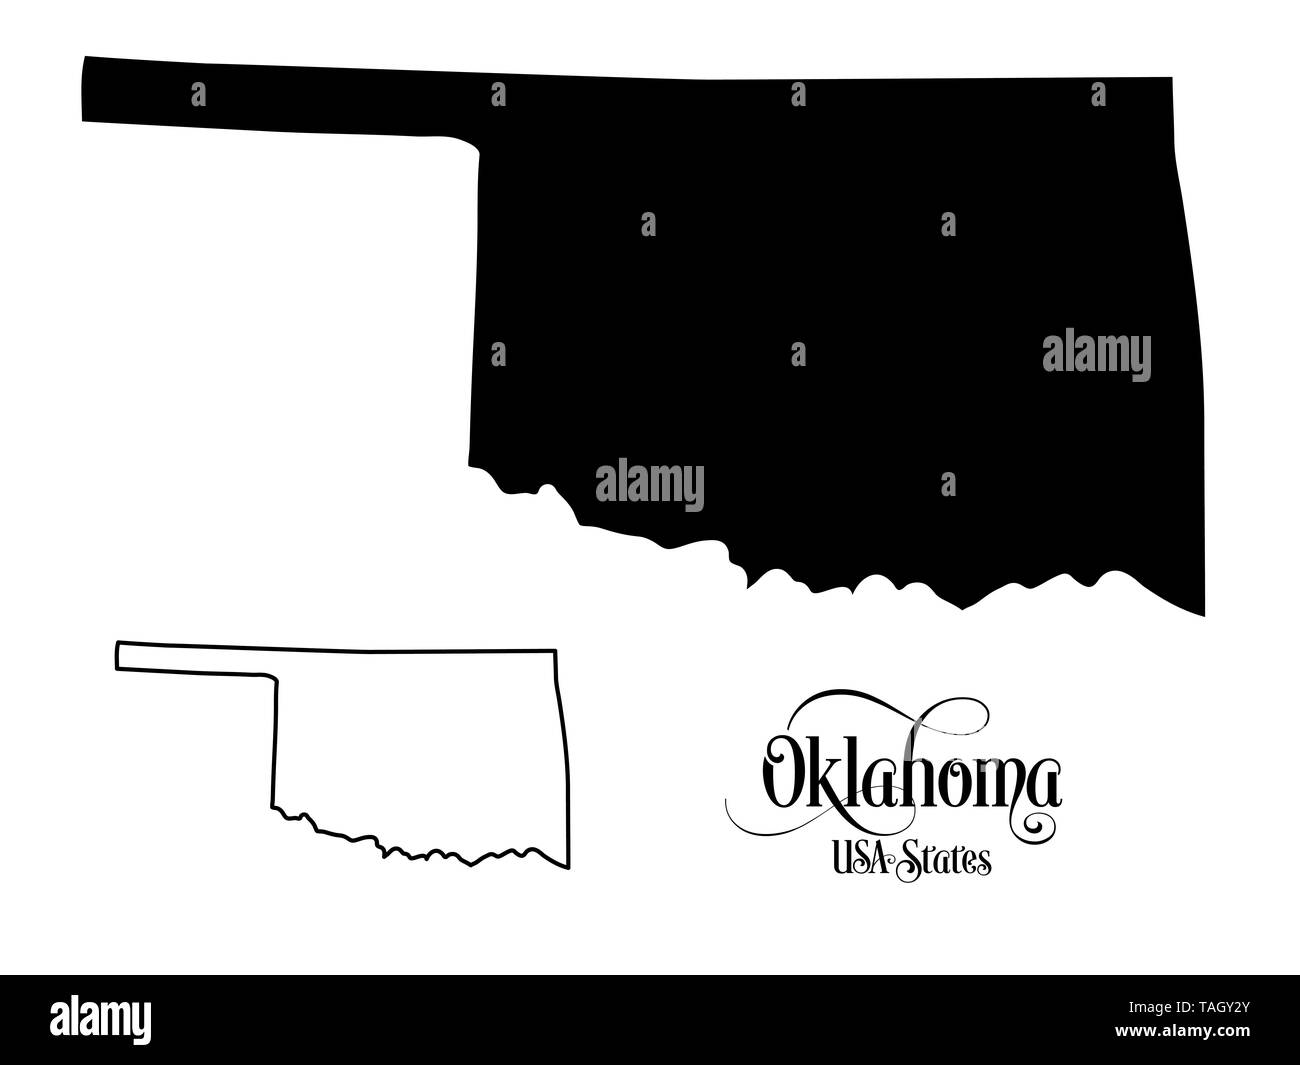 Map of The United States of America (USA) State of Oklahoma - Illustration on White Background. Stock Photo